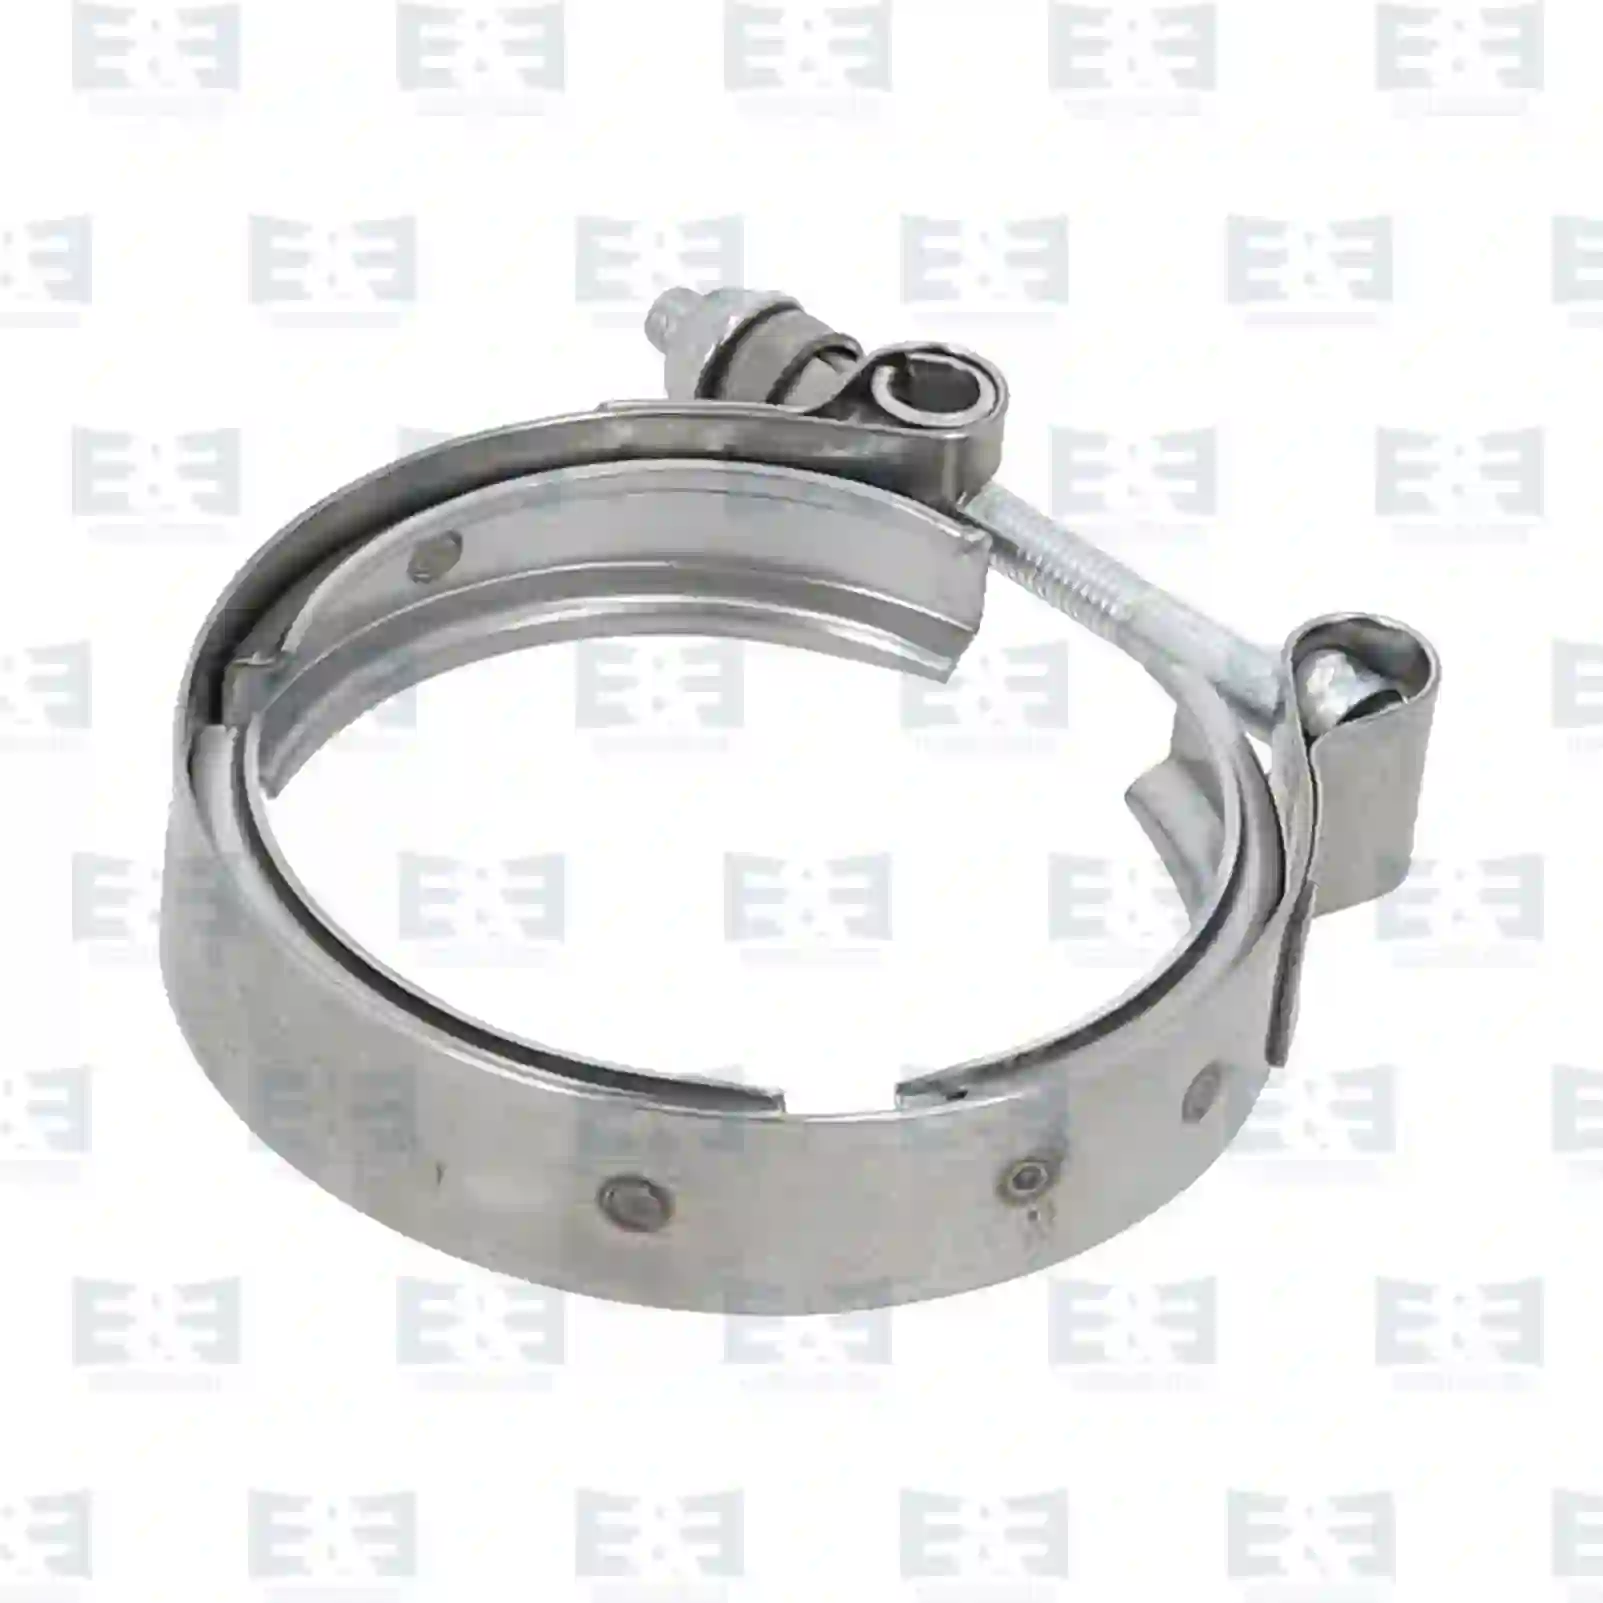  Tensioning clamp || E&E Truck Spare Parts | Truck Spare Parts, Auotomotive Spare Parts